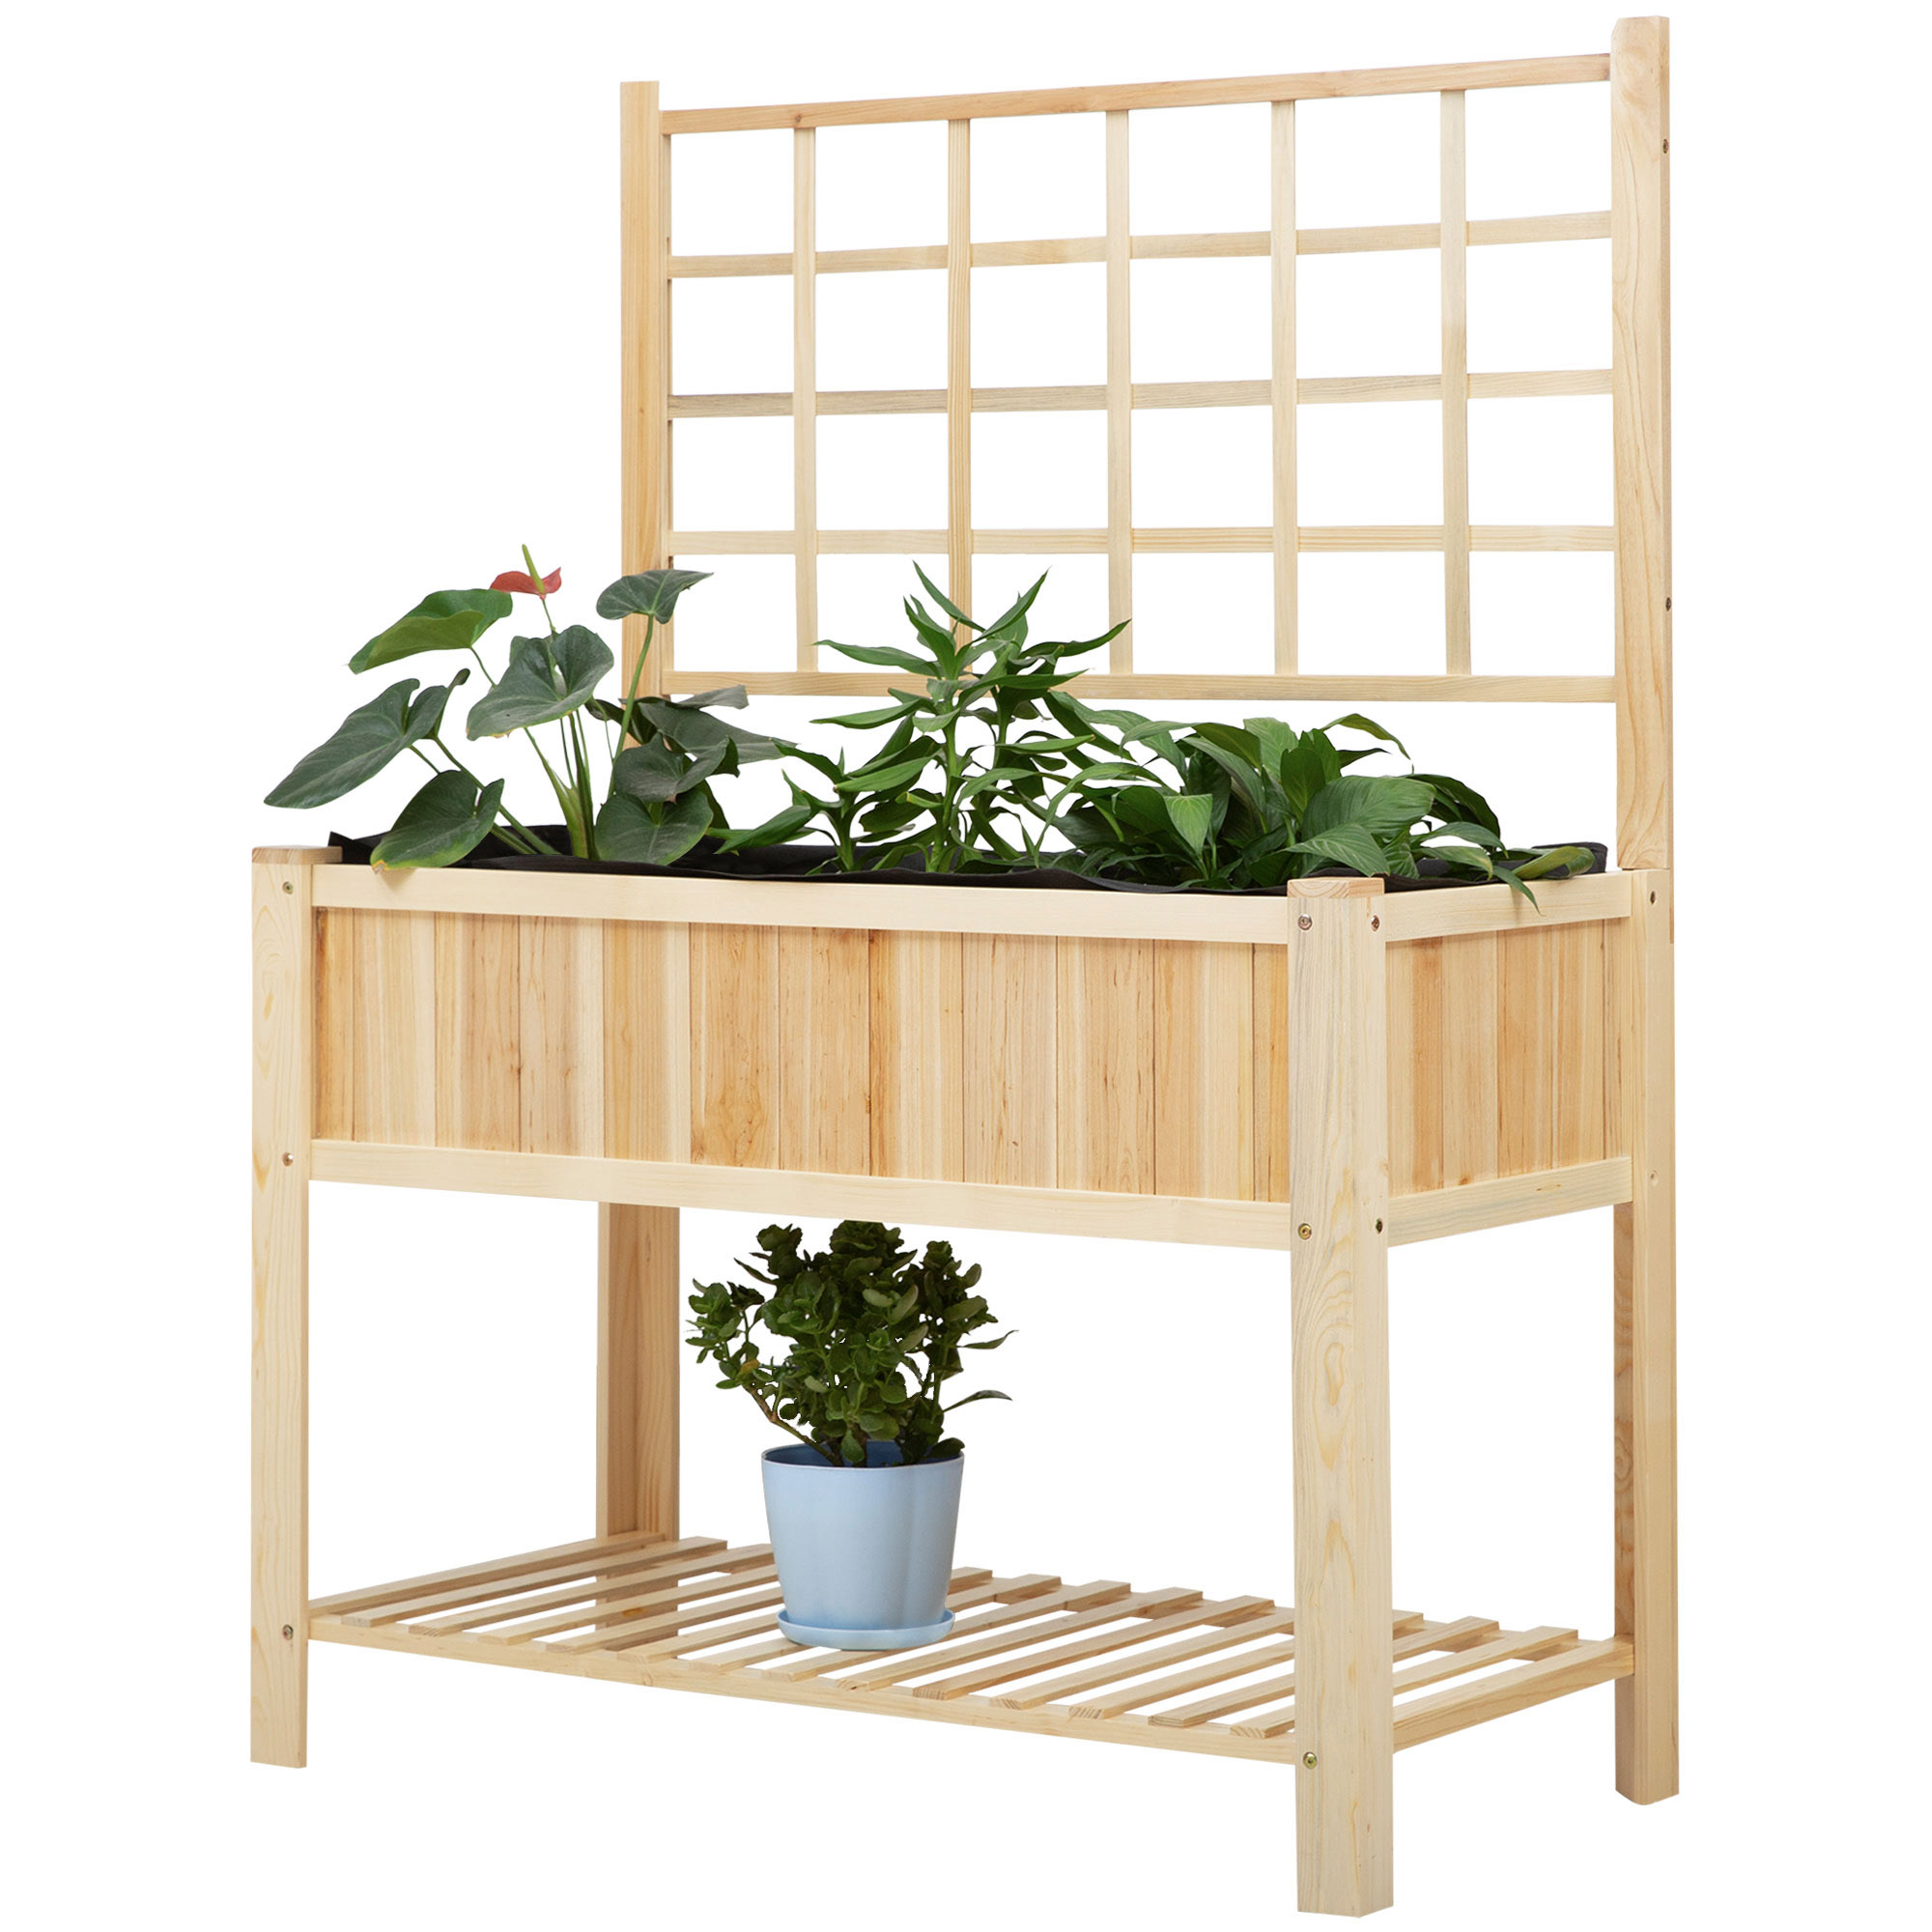 Outsunny 47” Wooden Raised Garden Bed with Trellis